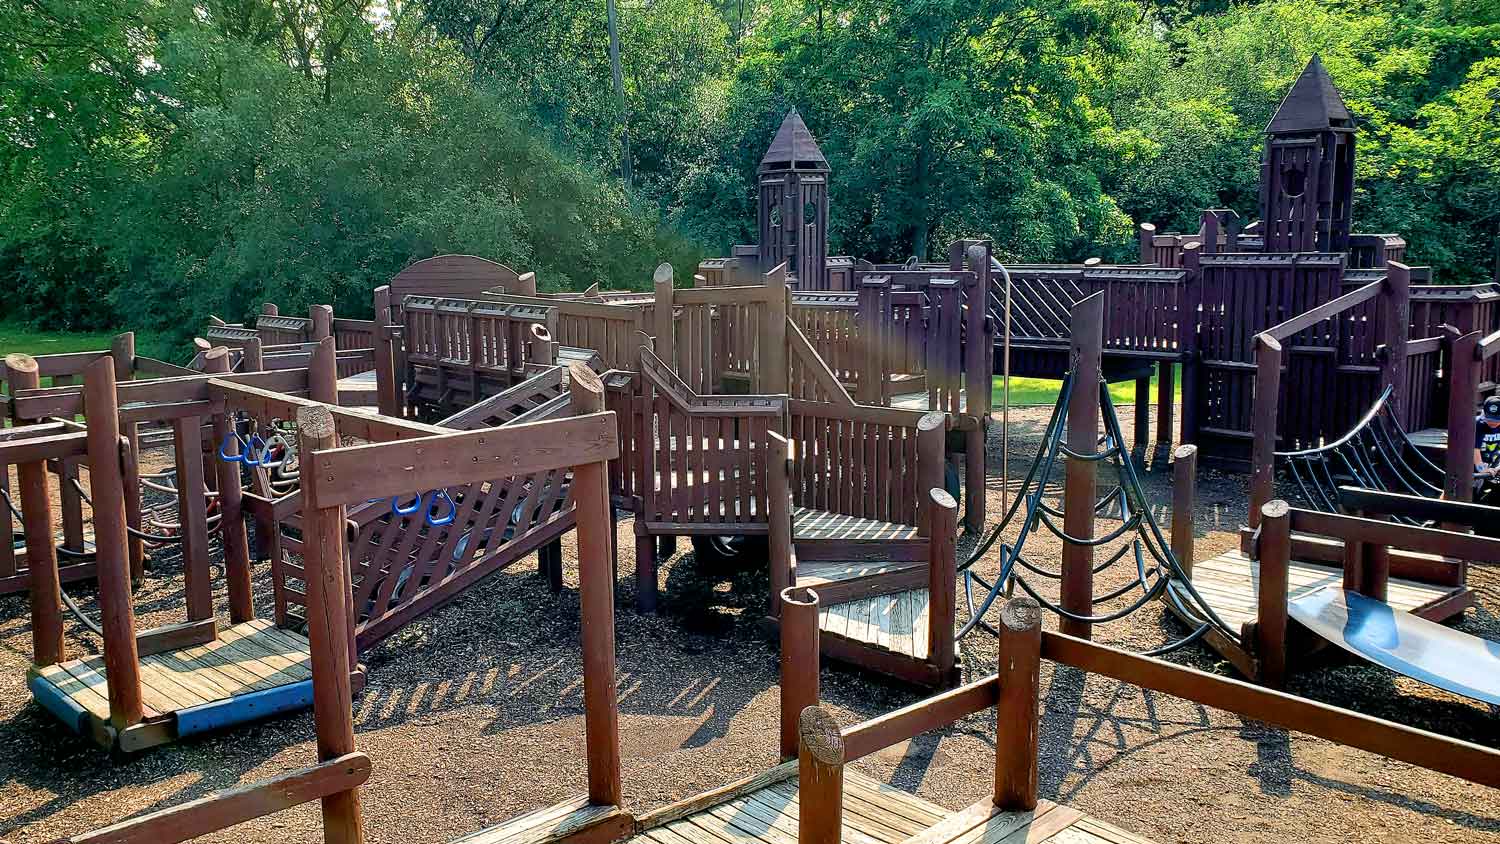 Massive wooden playground at Centennial Park in Antioch, IL.